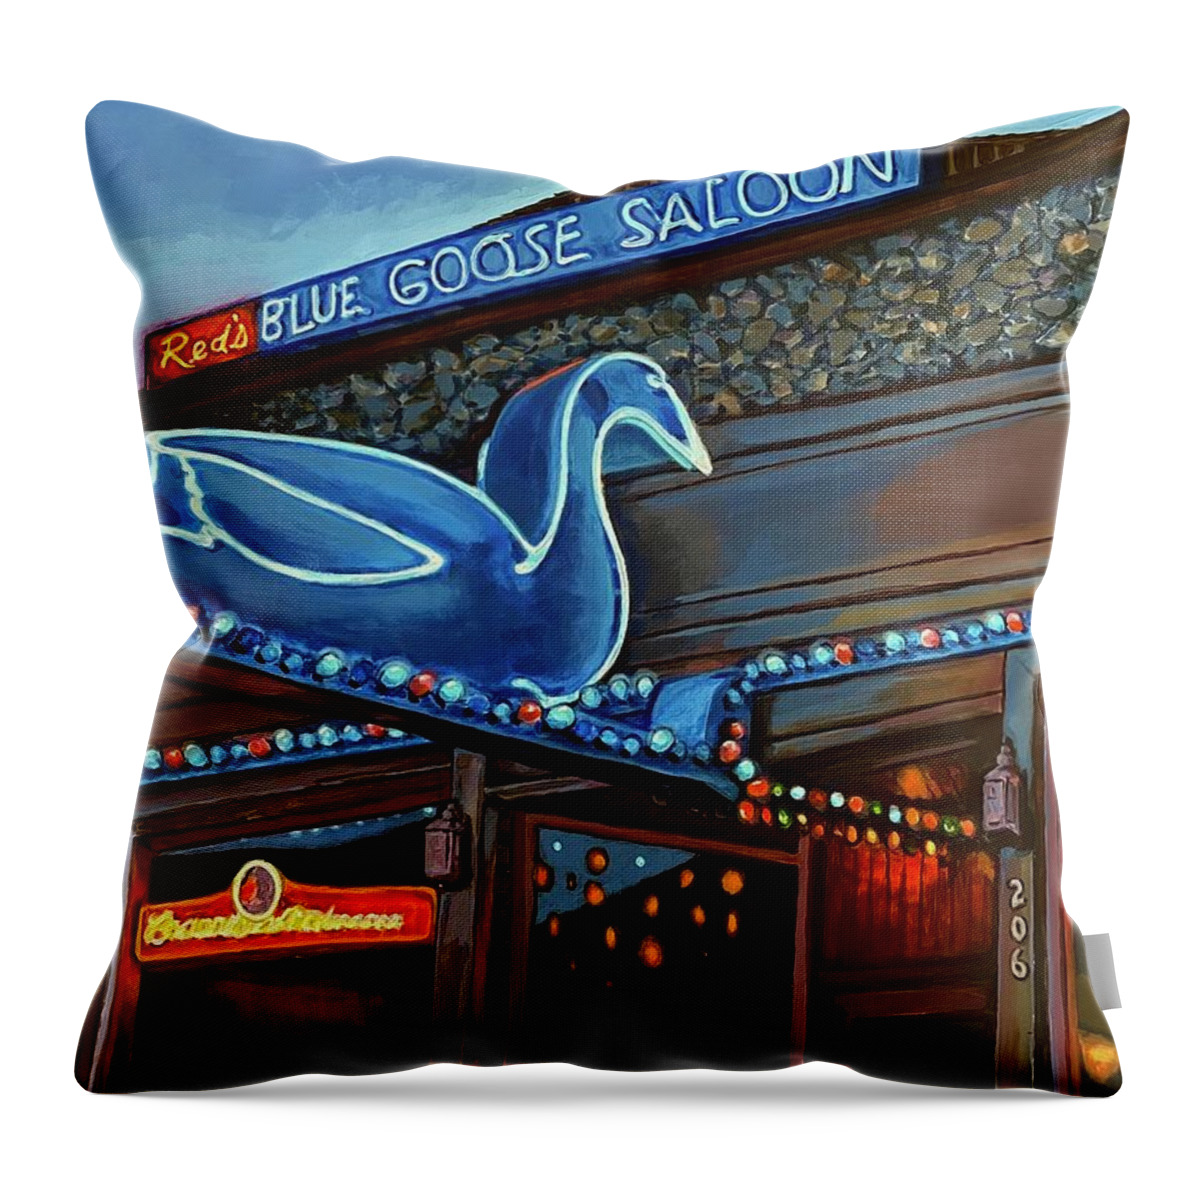 Blue Goose Saloon Throw Pillow featuring the painting Reds Blue Goose Saloon by Les Herman